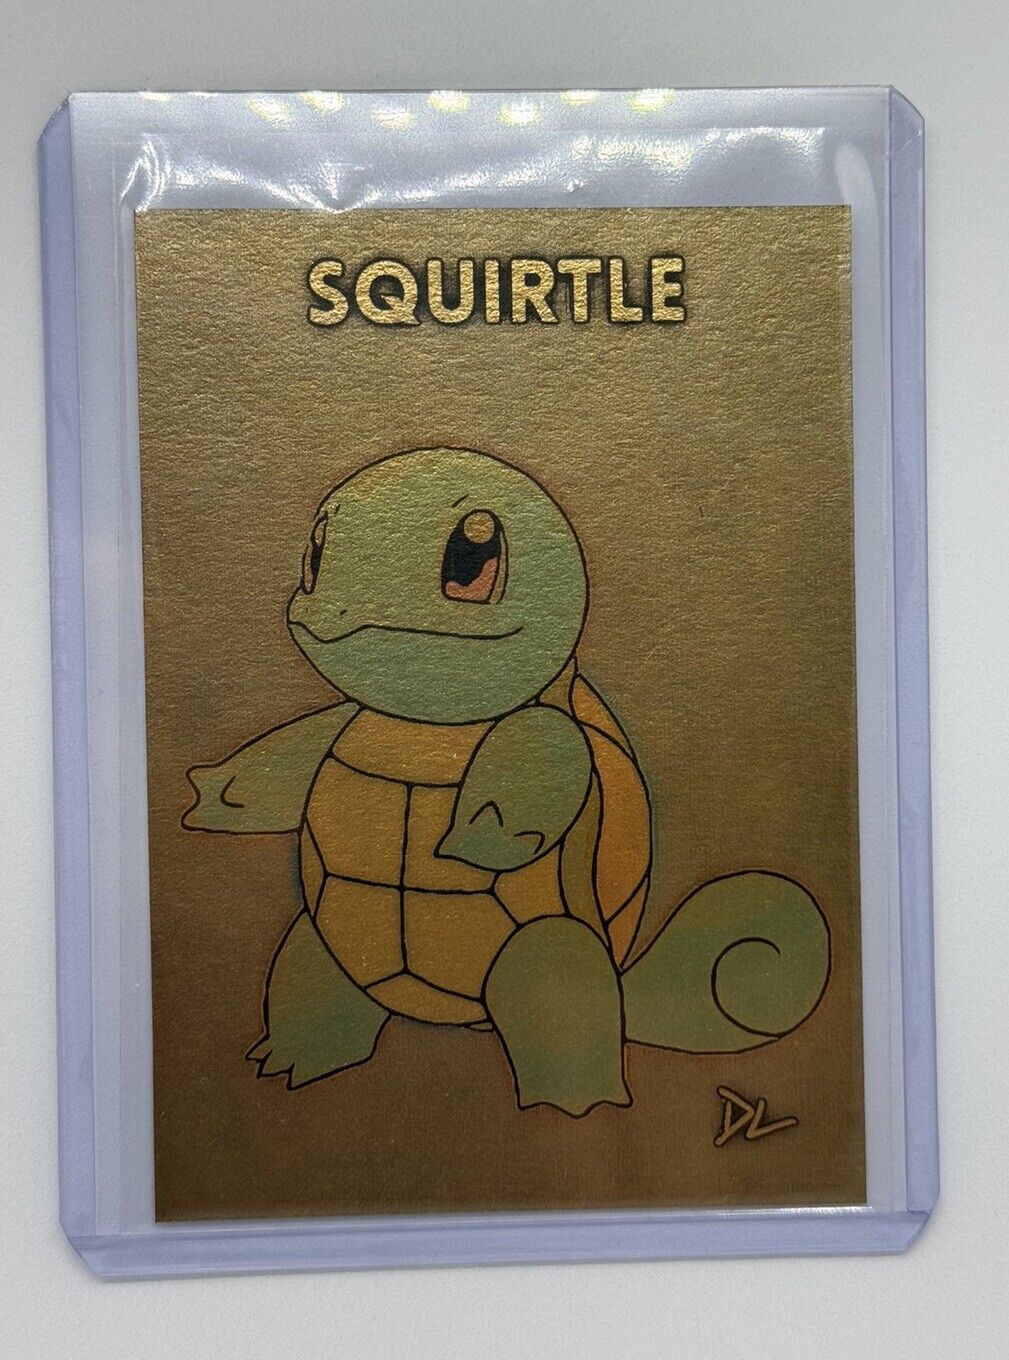 Squirtle Gold Plated Limited Edition Artist Signed Pokemon Trading Card 1/1